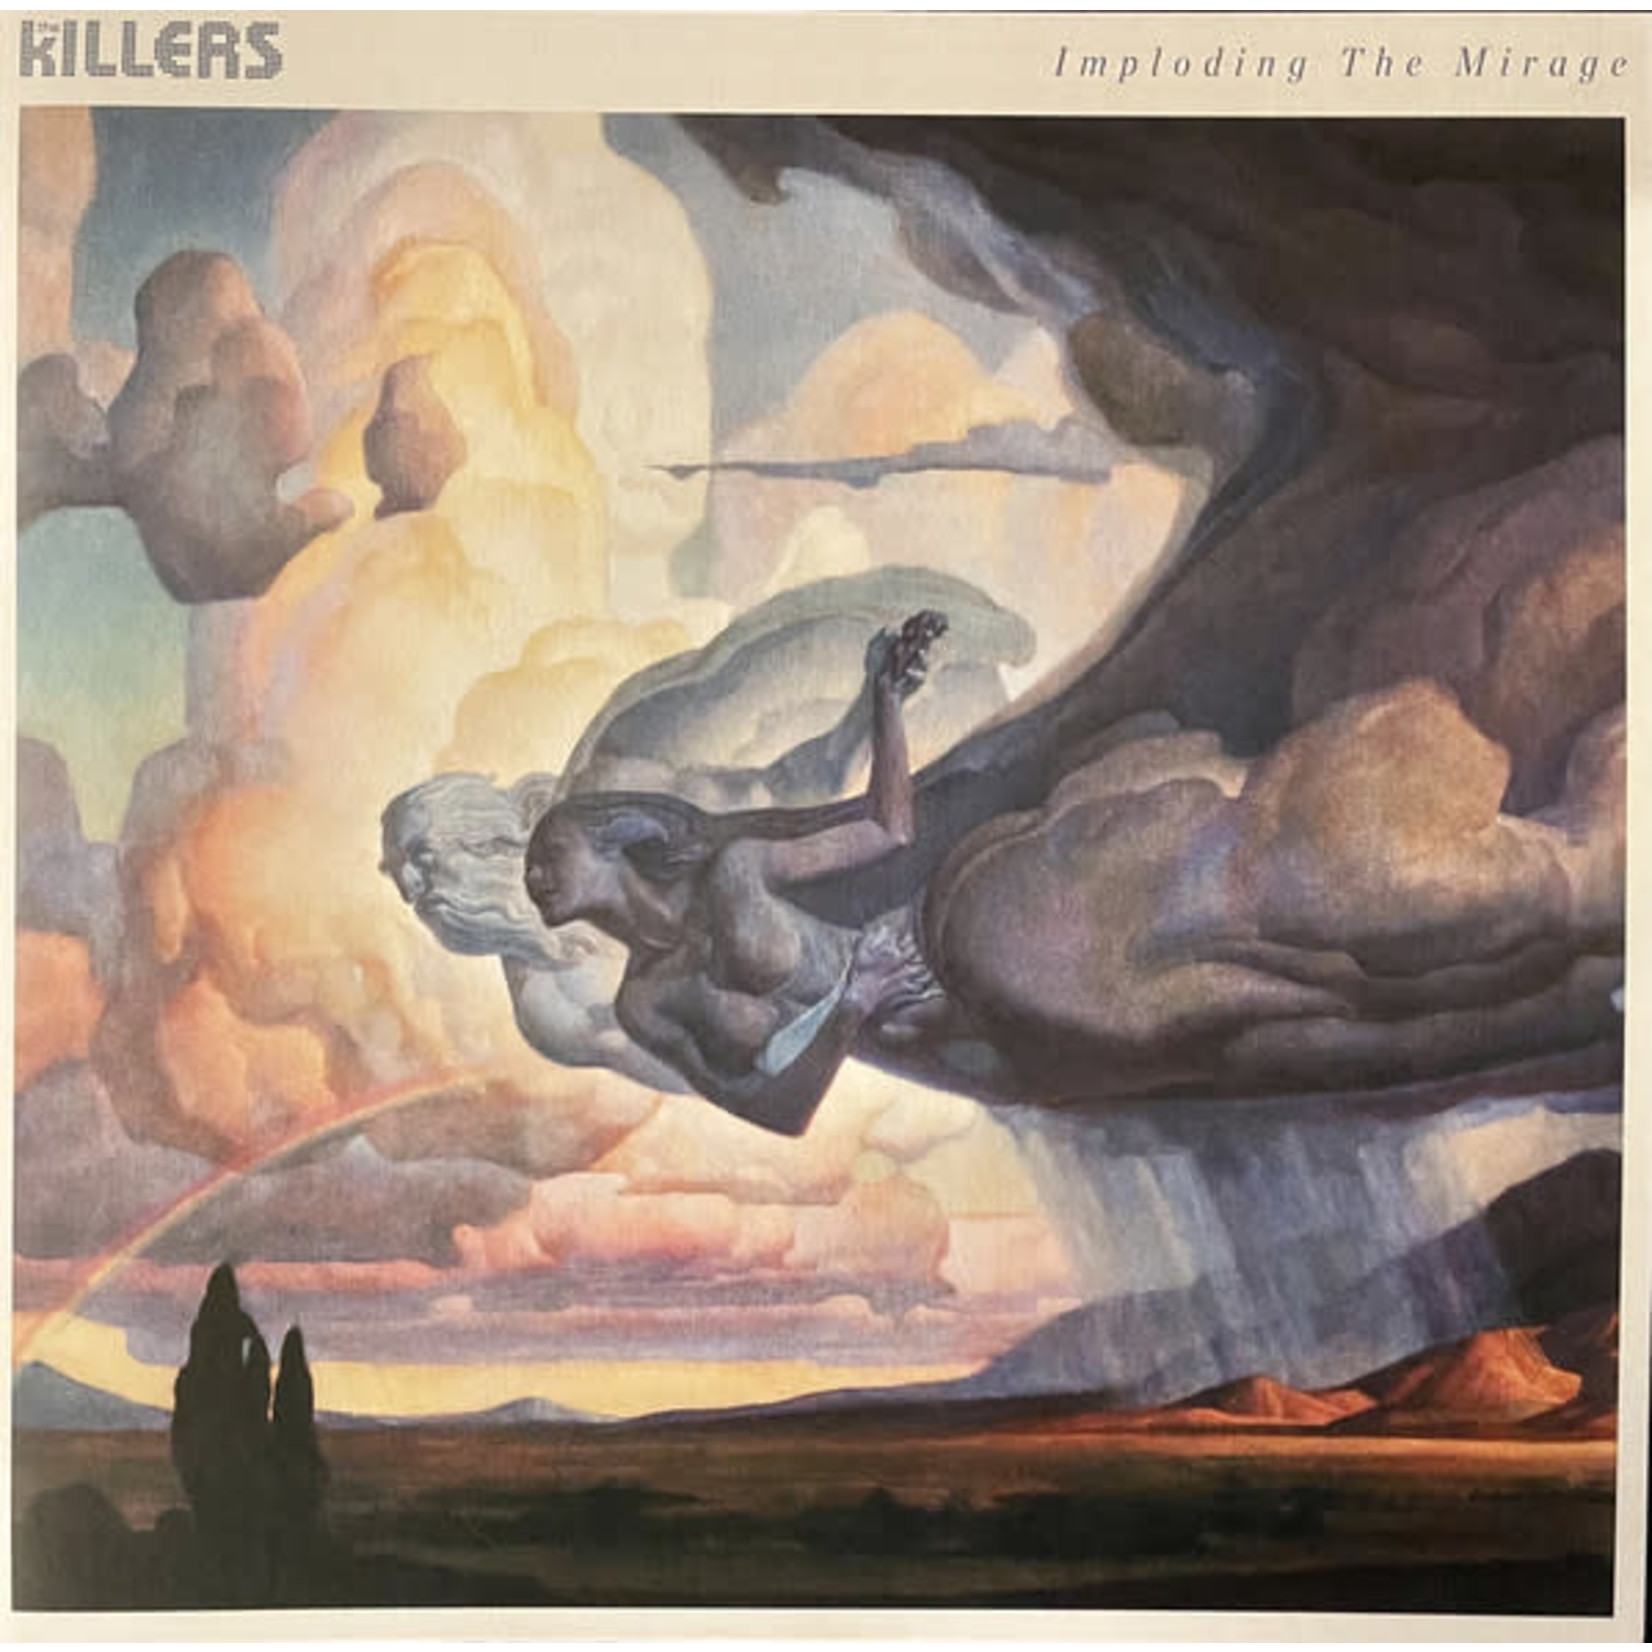 The Killers The Killers – Imploding The Mirage (New, LP, 	Island Records, 2020)